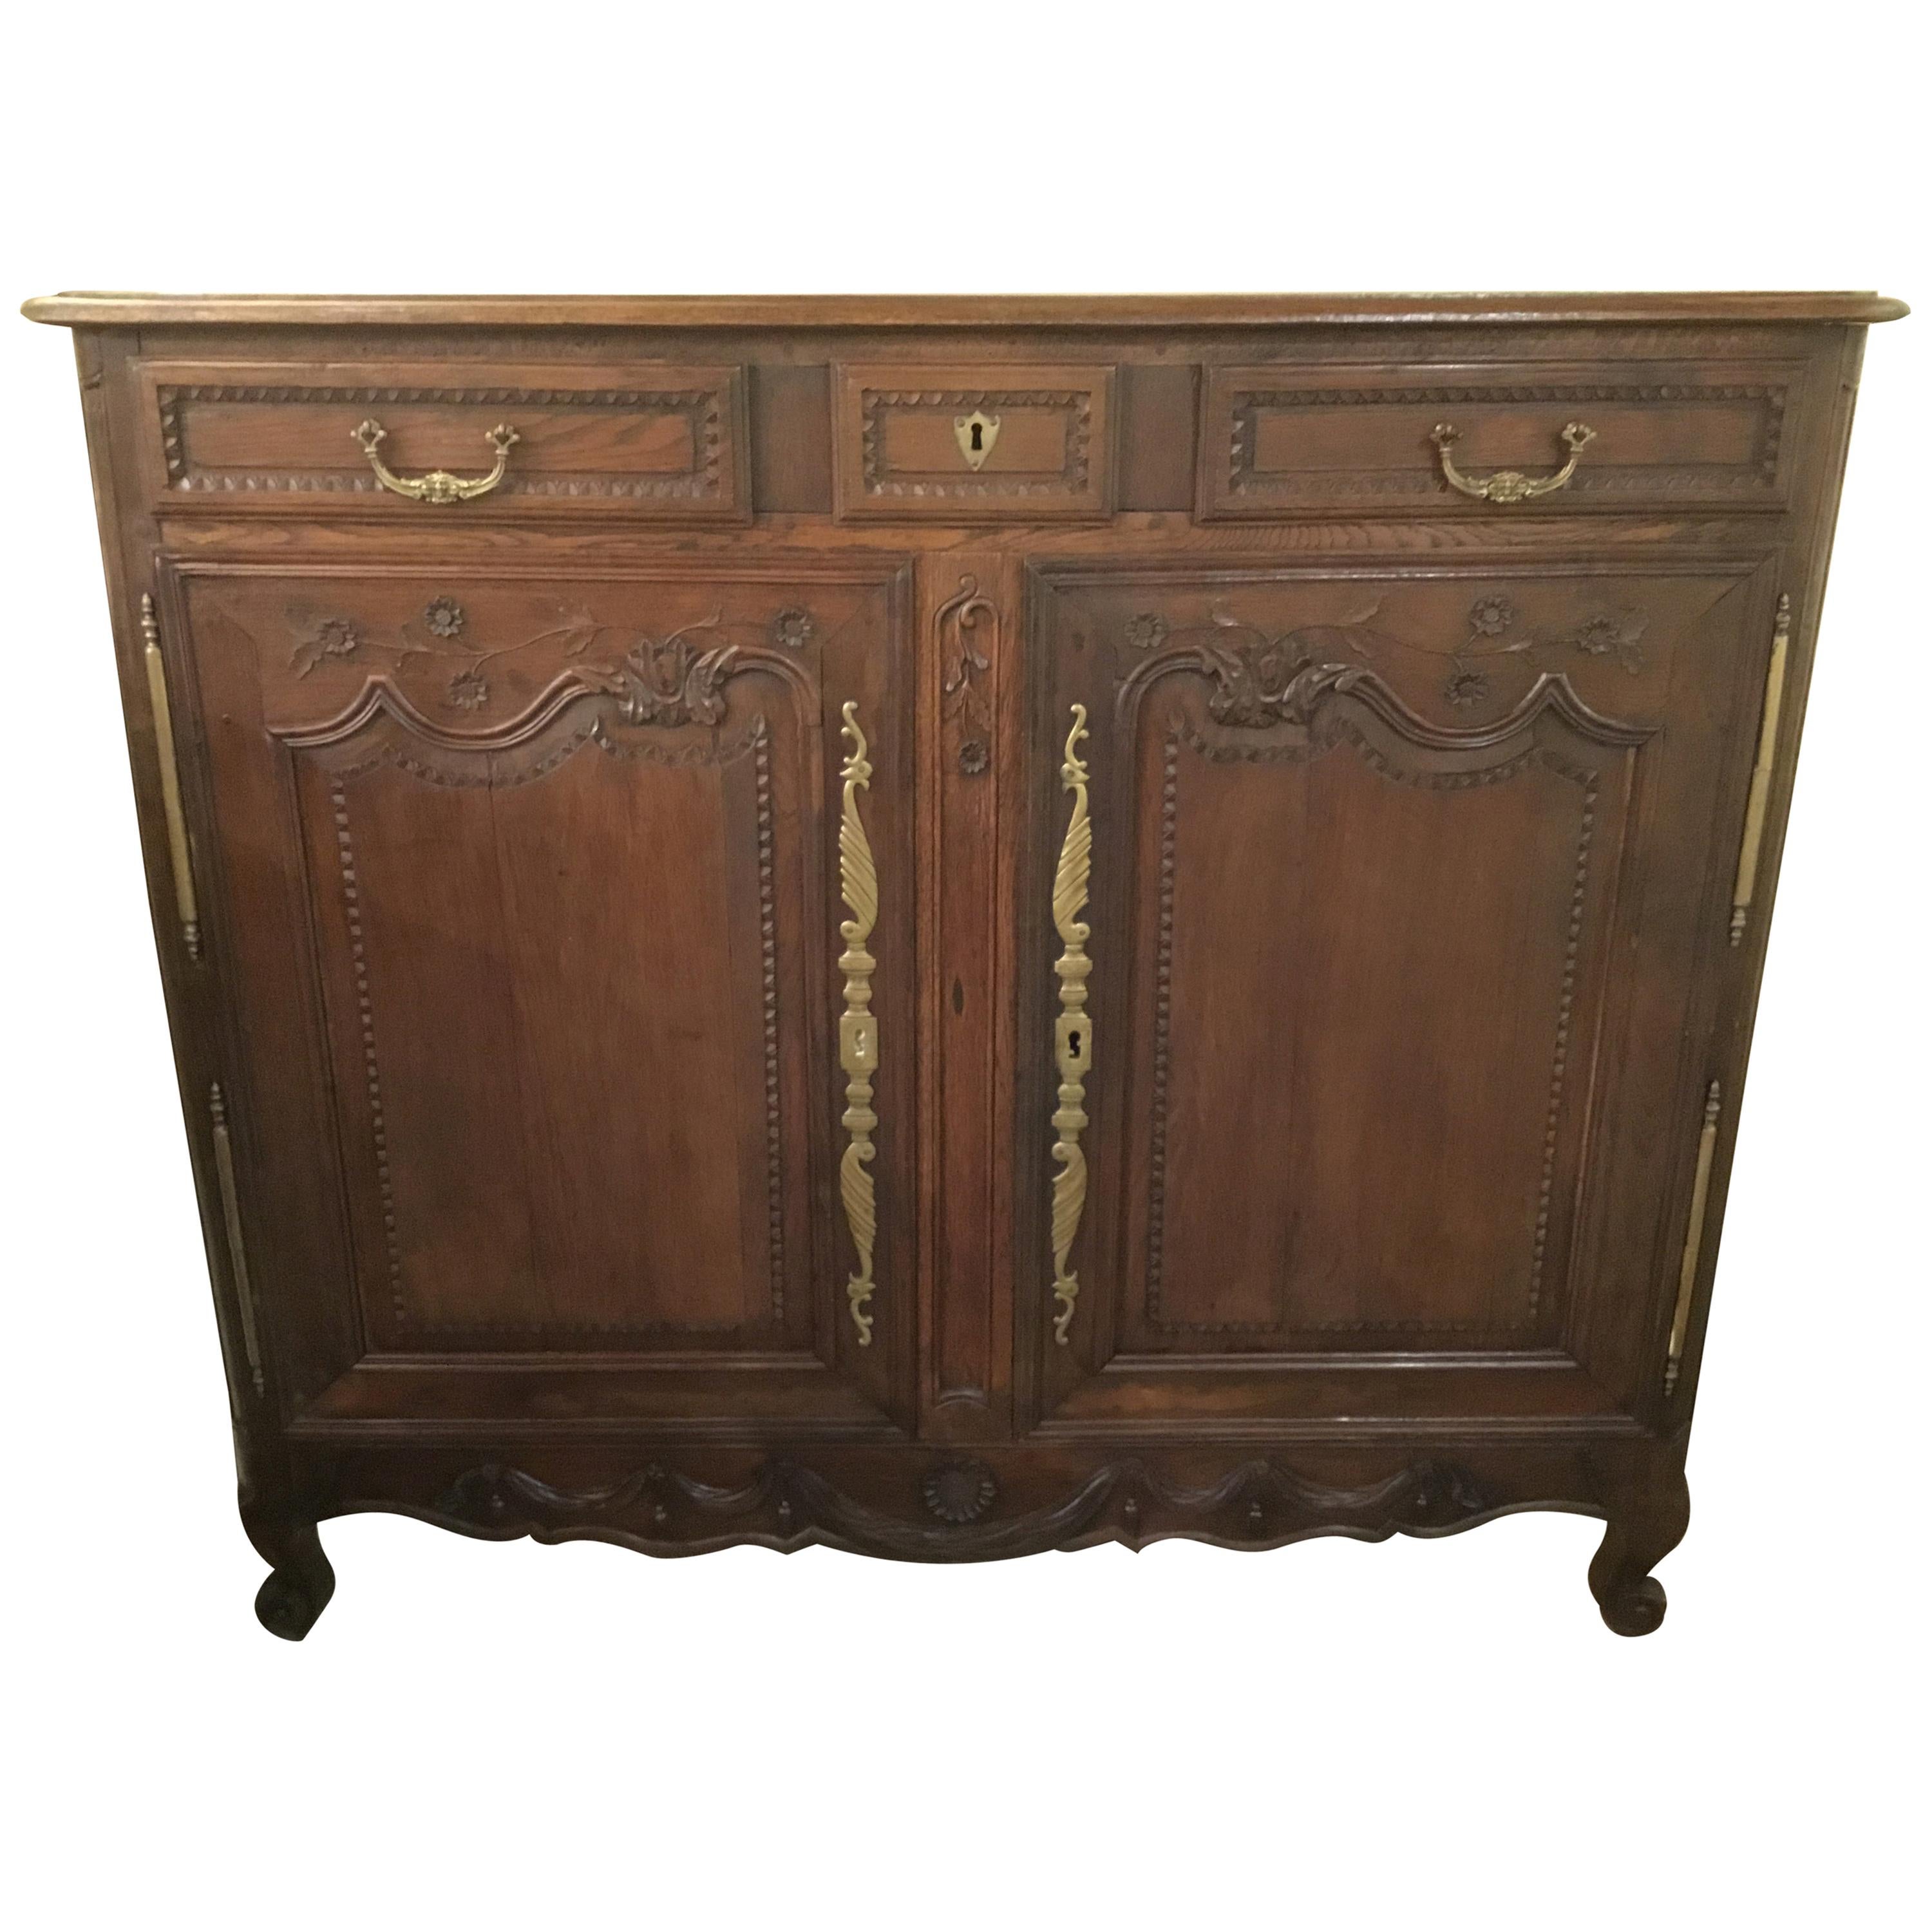 French Country Oakwood Carved Cabinet/Sideboard, circa Late 18th Century